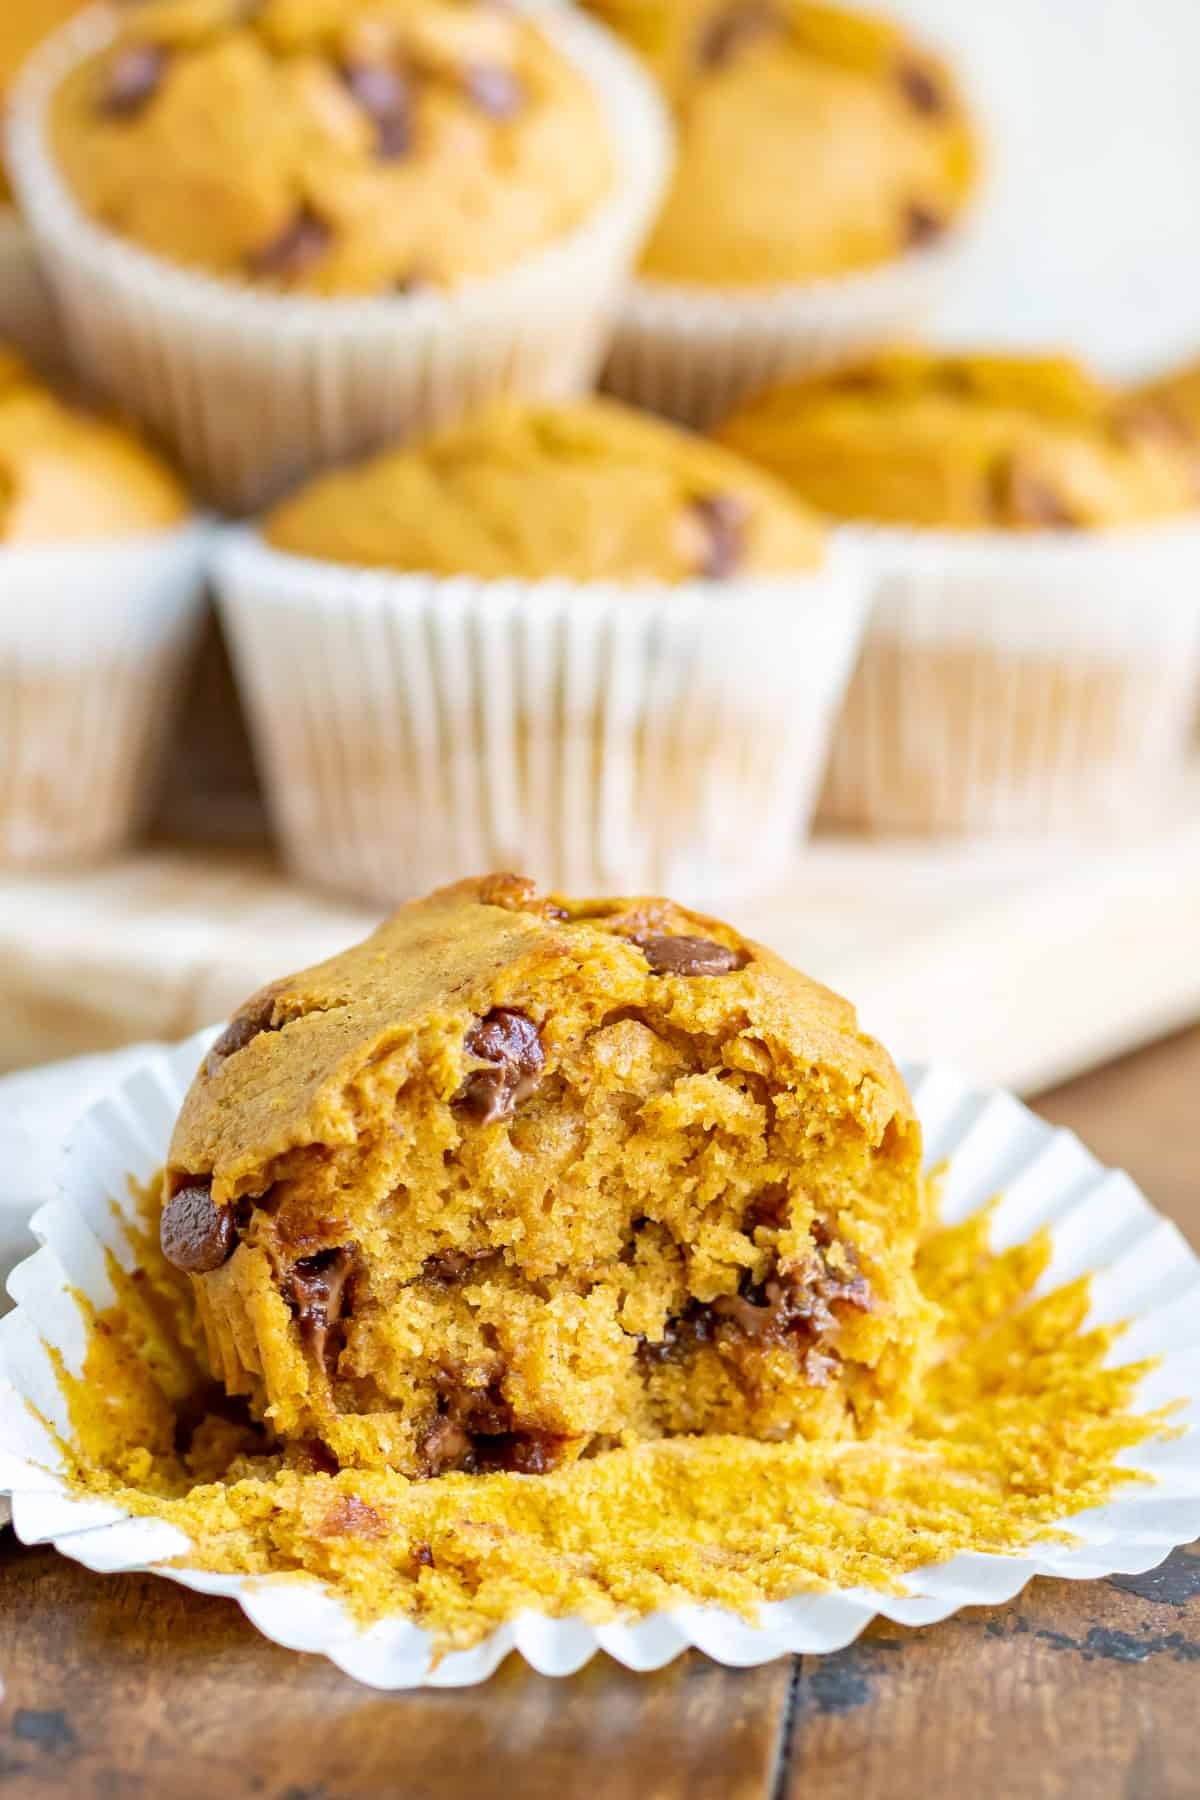 A muffin with a bite out.